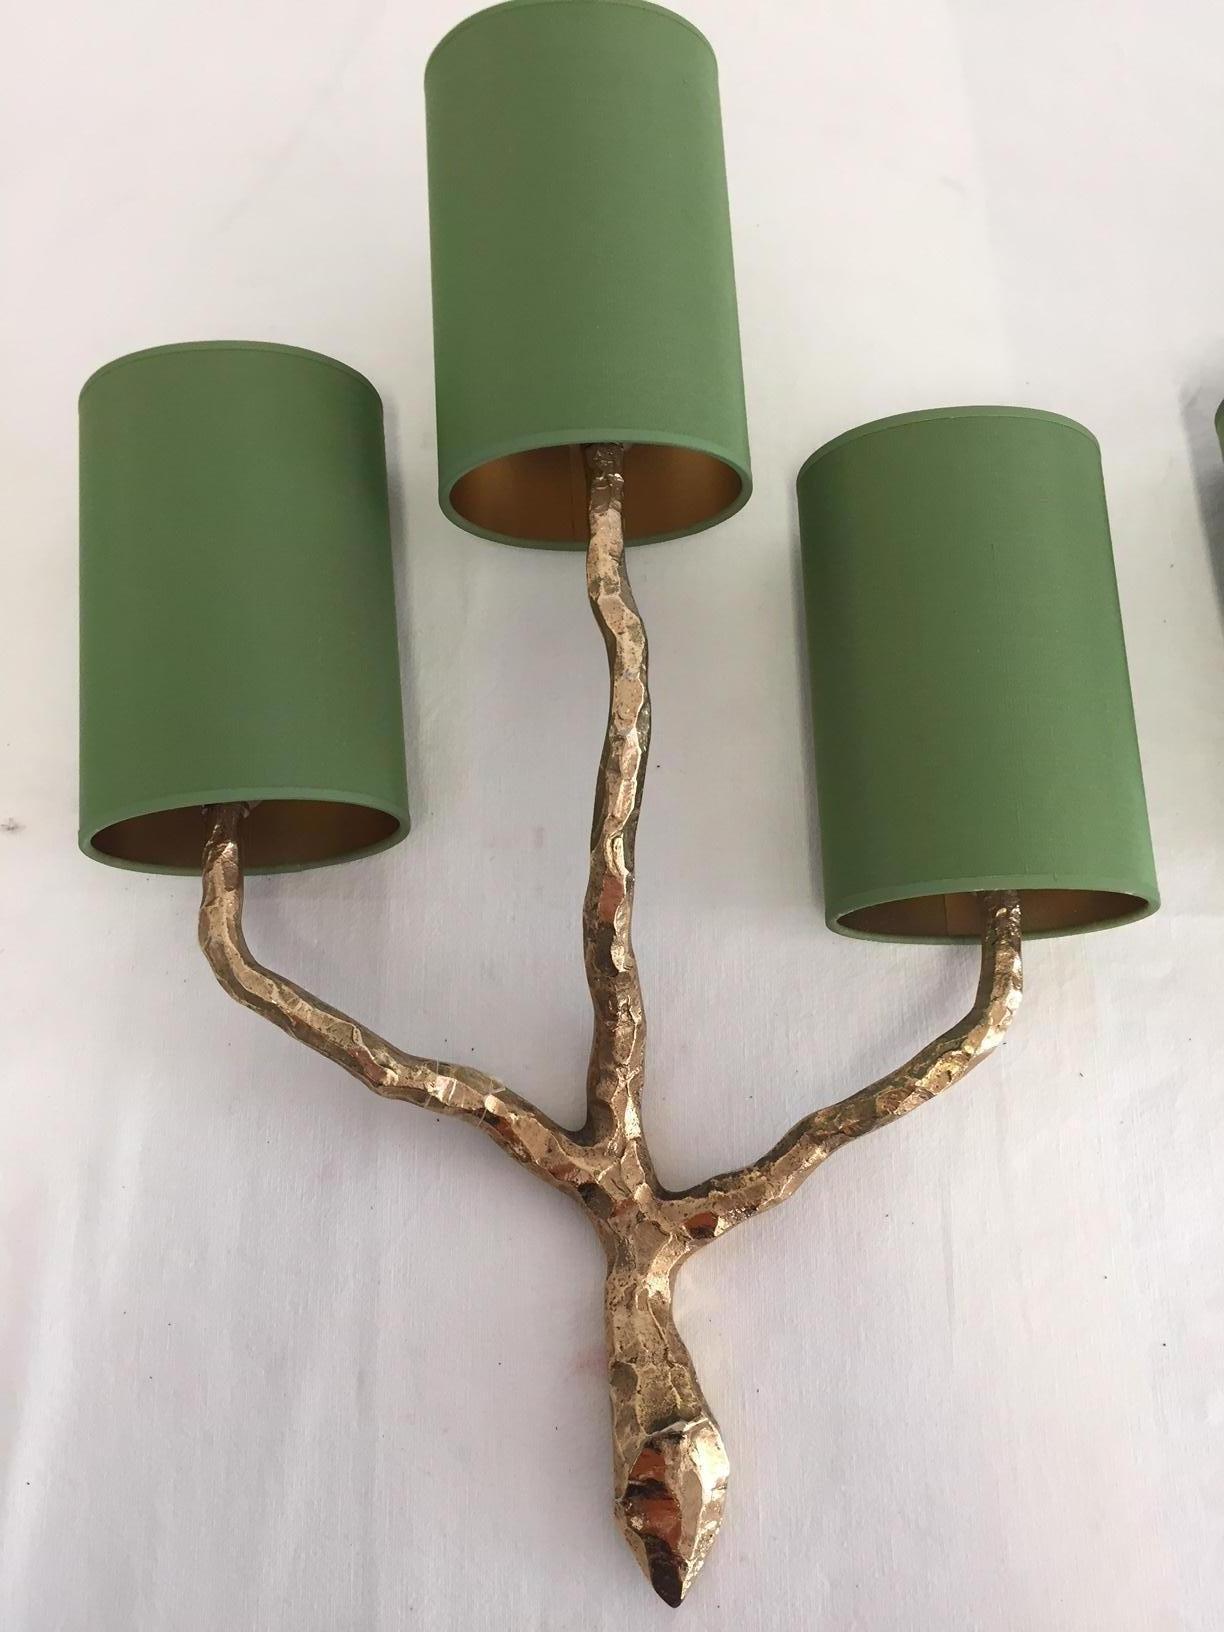 Pair of French Art Decorative bronze sconces by Maison Arlus from 1960.
Very good condition, wired in European standard, lamp shades in col. green silk inside with glossy gold lining

Measures: Height 51cm, width 34cm, depth 14cm.